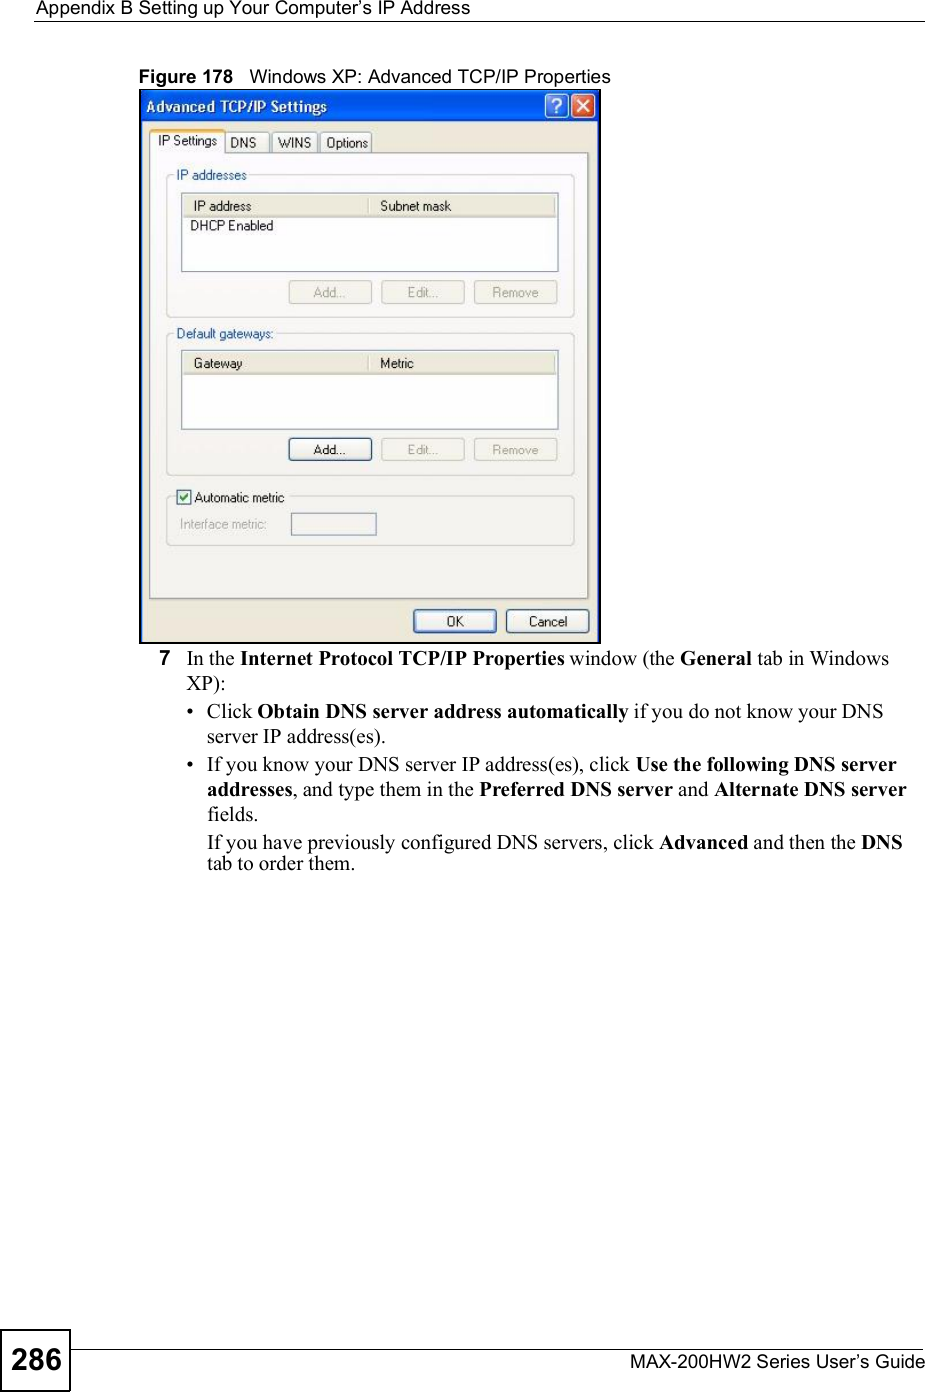 Appendix BSetting up Your Computer s IP AddressMAX-200HW2 Series User s Guide286Figure 178   Windows XP: Advanced TCP/IP Properties7In the Internet Protocol TCP/IP Properties window (the General tab in Windows XP): Click Obtain DNS server address automatically if you do not know your DNS server IP address(es). If you know your DNS server IP address(es), click Use the following DNS server addresses, and type them in the Preferred DNSserver and Alternate DNS serverfields.If you have previously configured DNS servers, click Advanced and then the DNStab to order them.